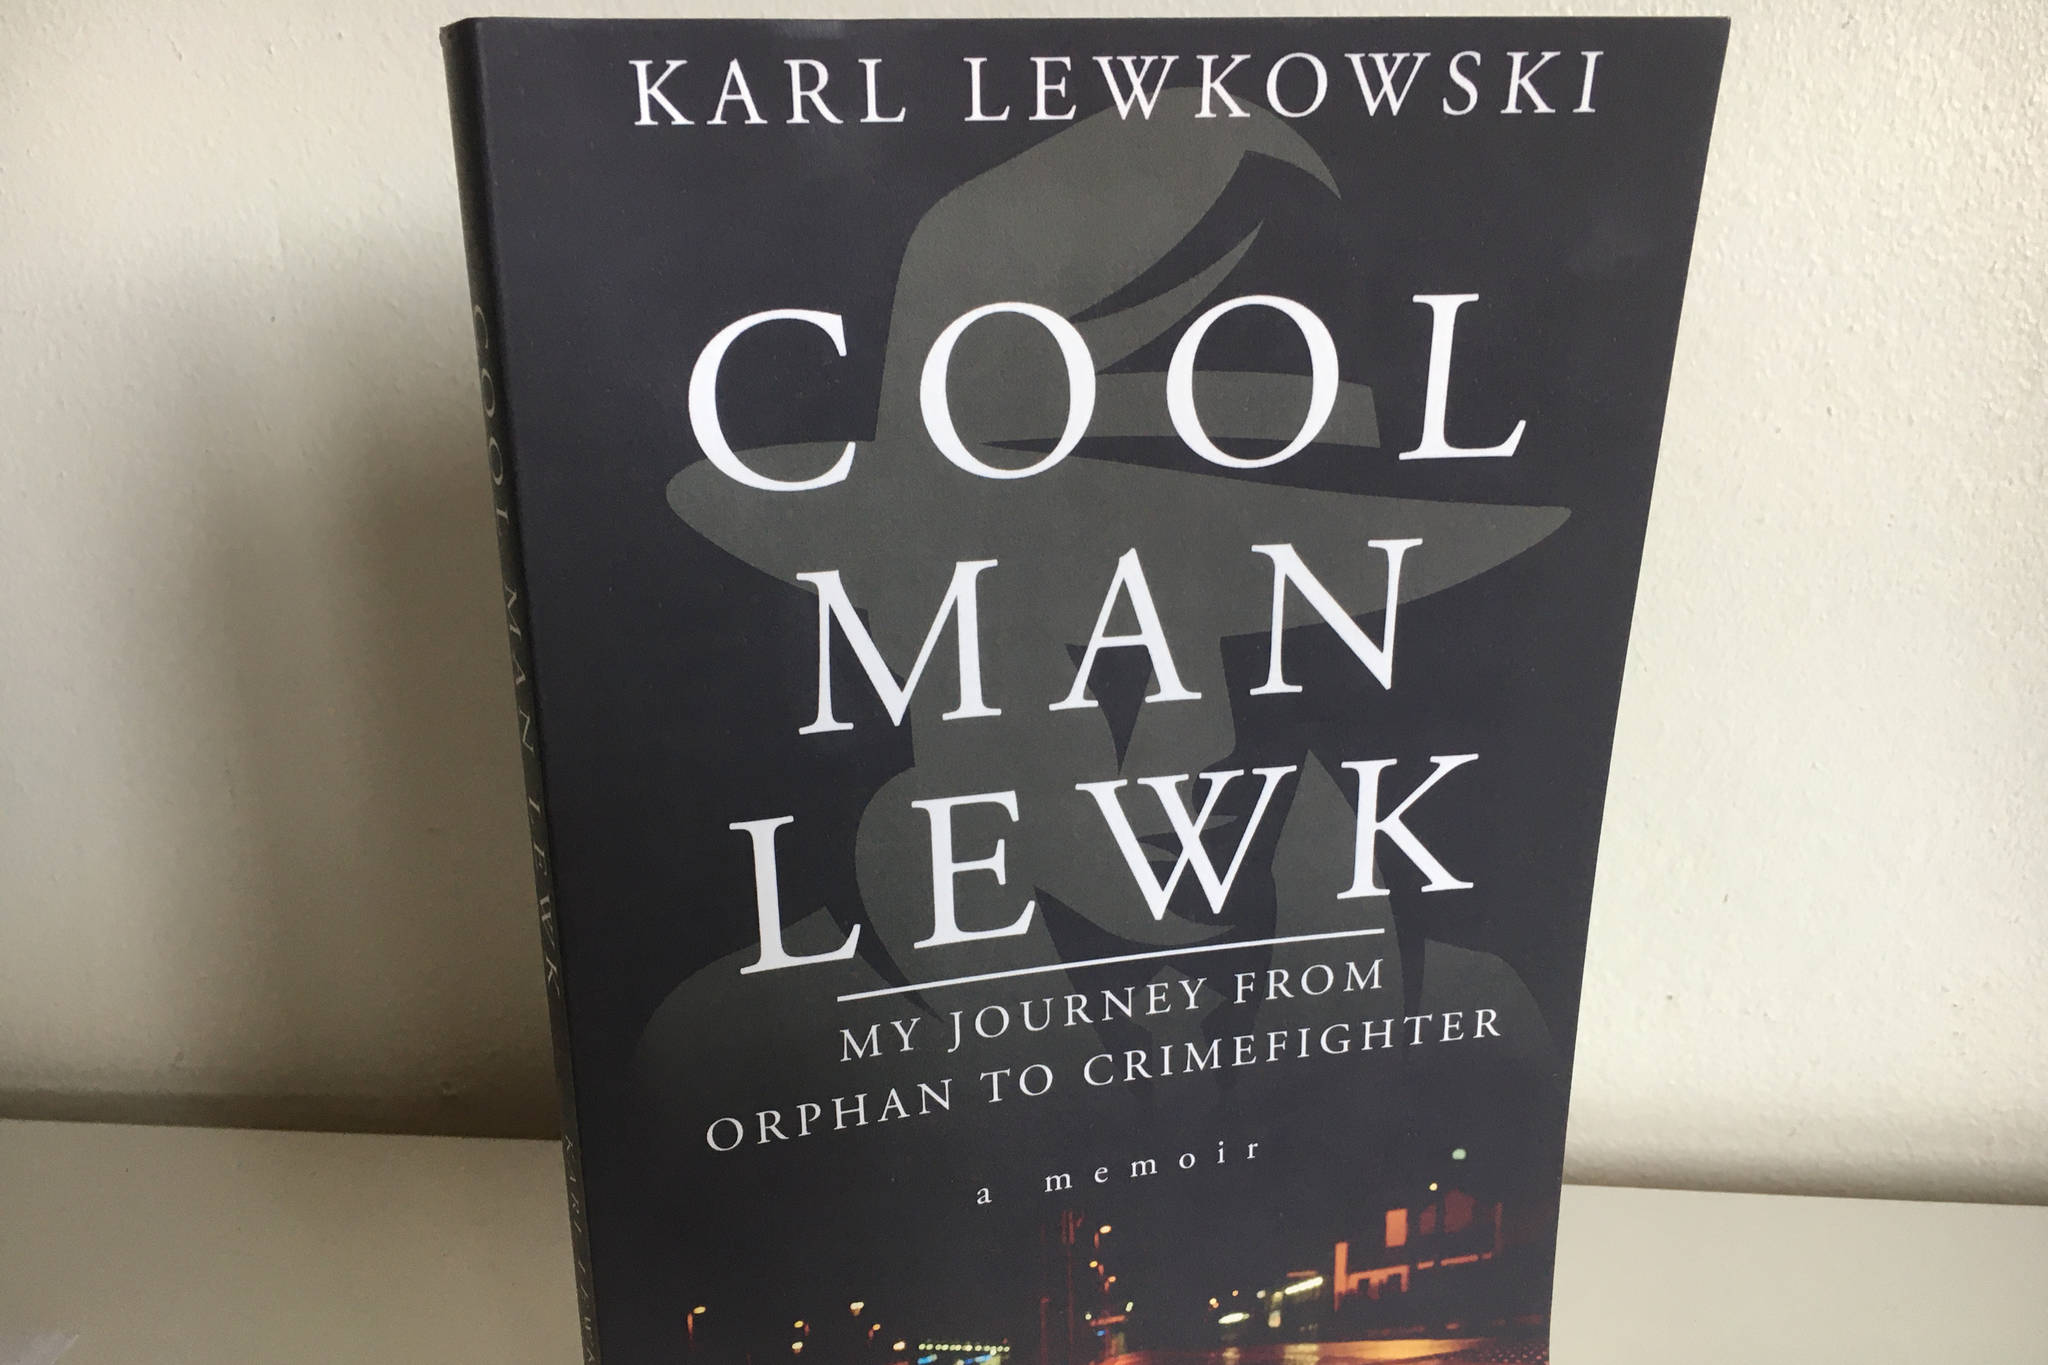 Karl Lewkowski’s book “Cool Man Lewk: My Journey from Orphan to Crimefighter” talks about Lewkowski’s seven years as an officer in the Juneau Police Department, among other aspects of his life. (Michael S. Lockett / Juneau Empire)